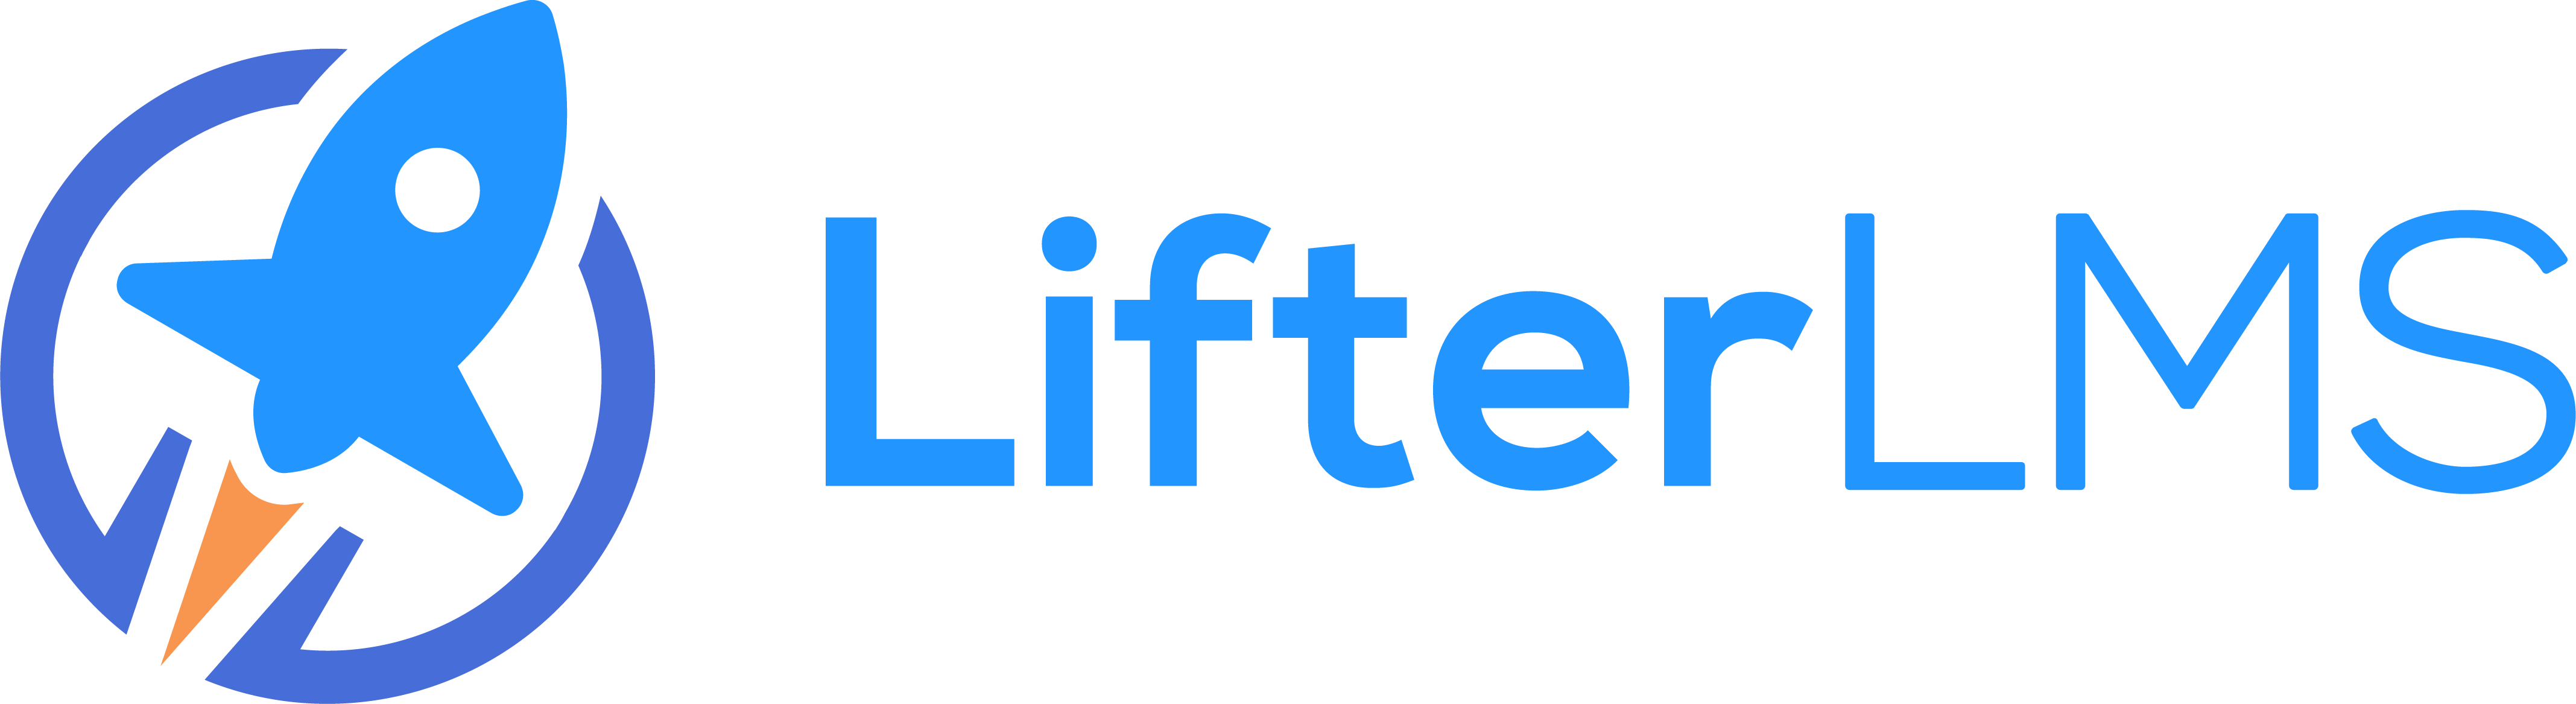 lifterlms-logo.png